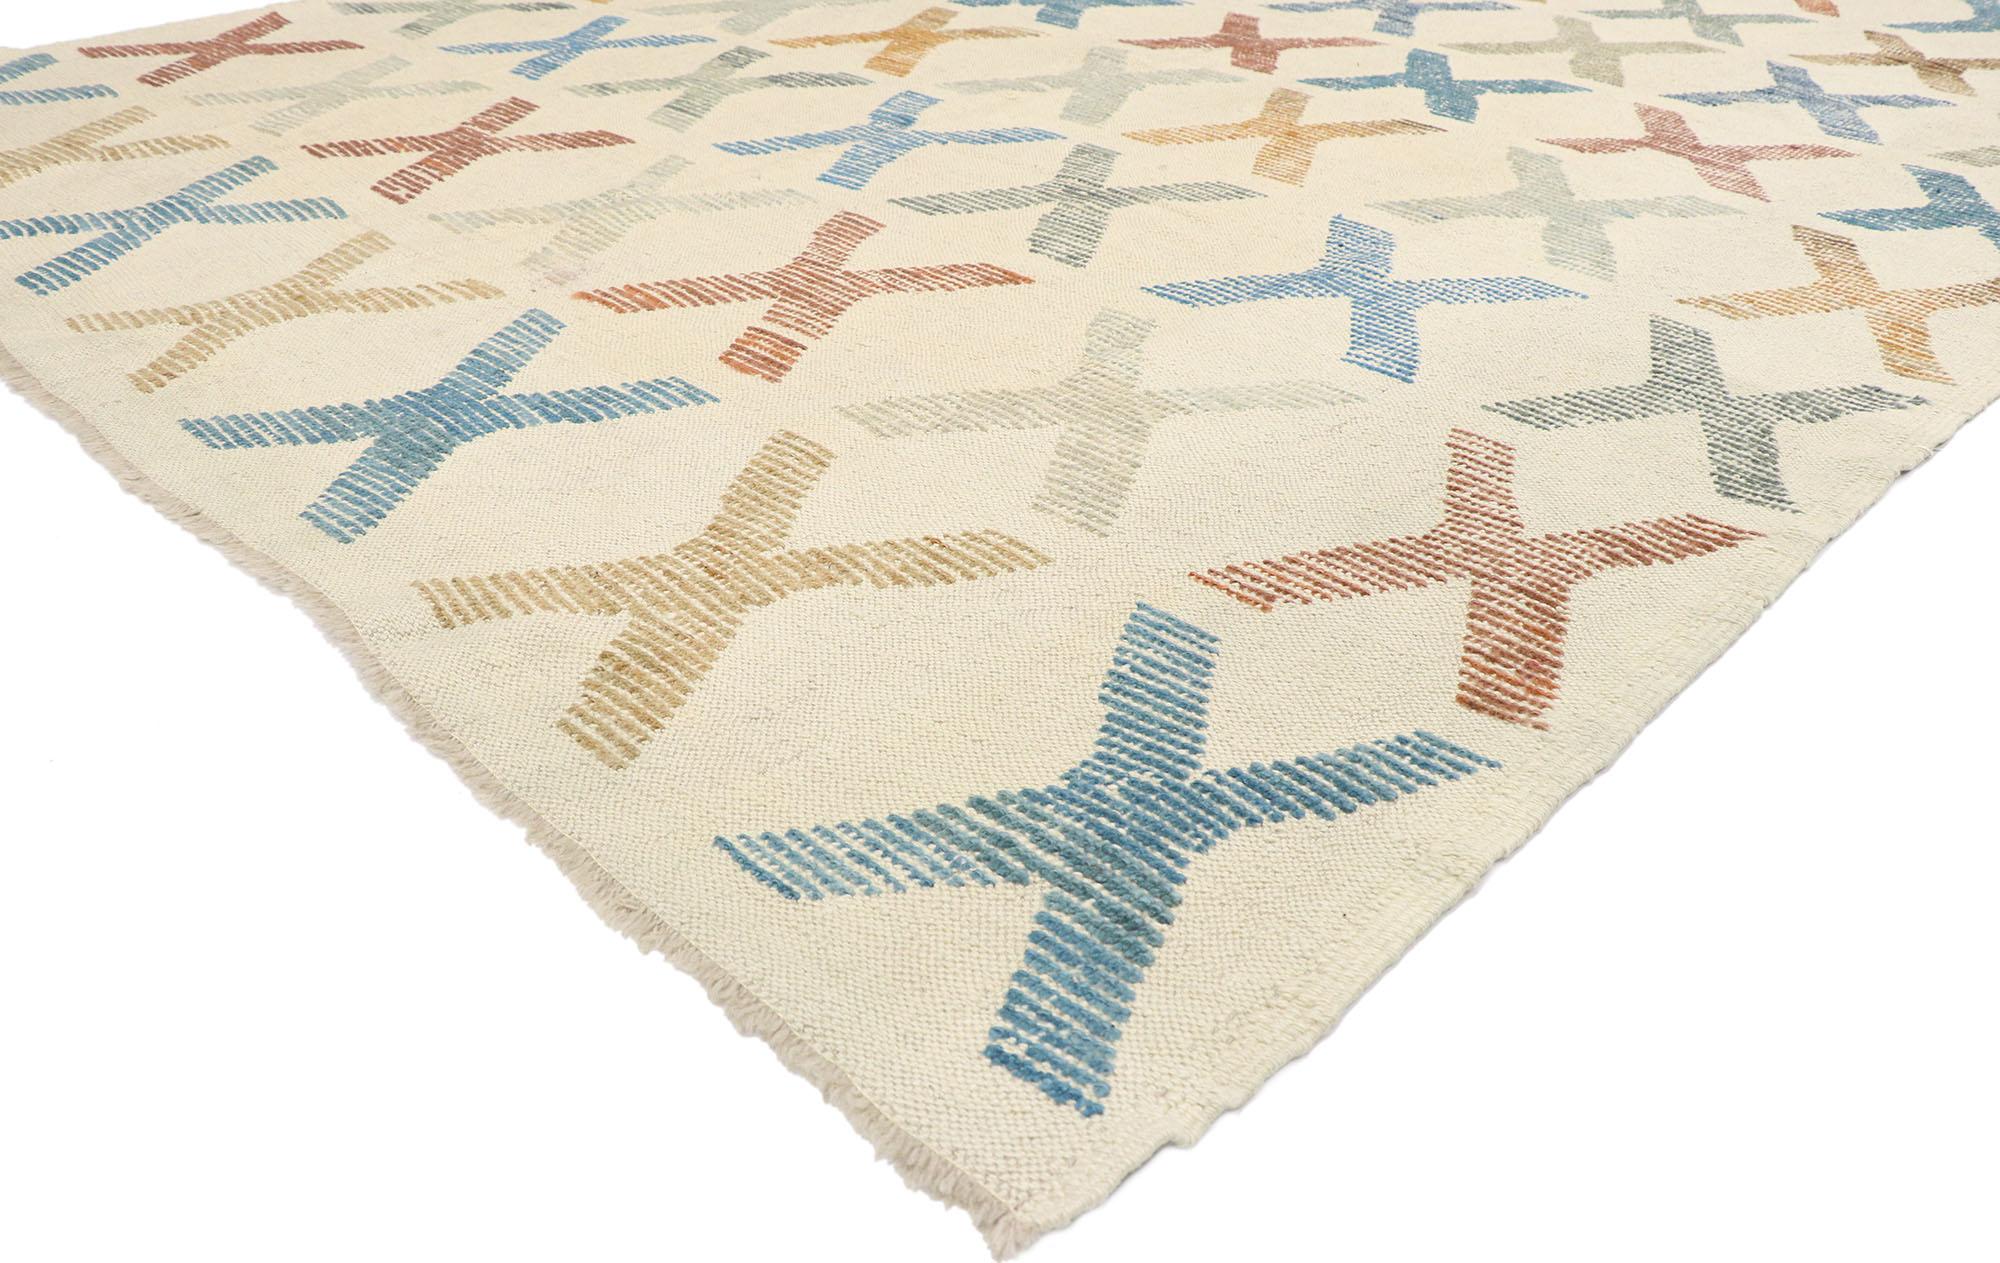 Hand-Woven New Contemporary Turkish Kilim Area Rug with Tribal Boho Chic Style For Sale